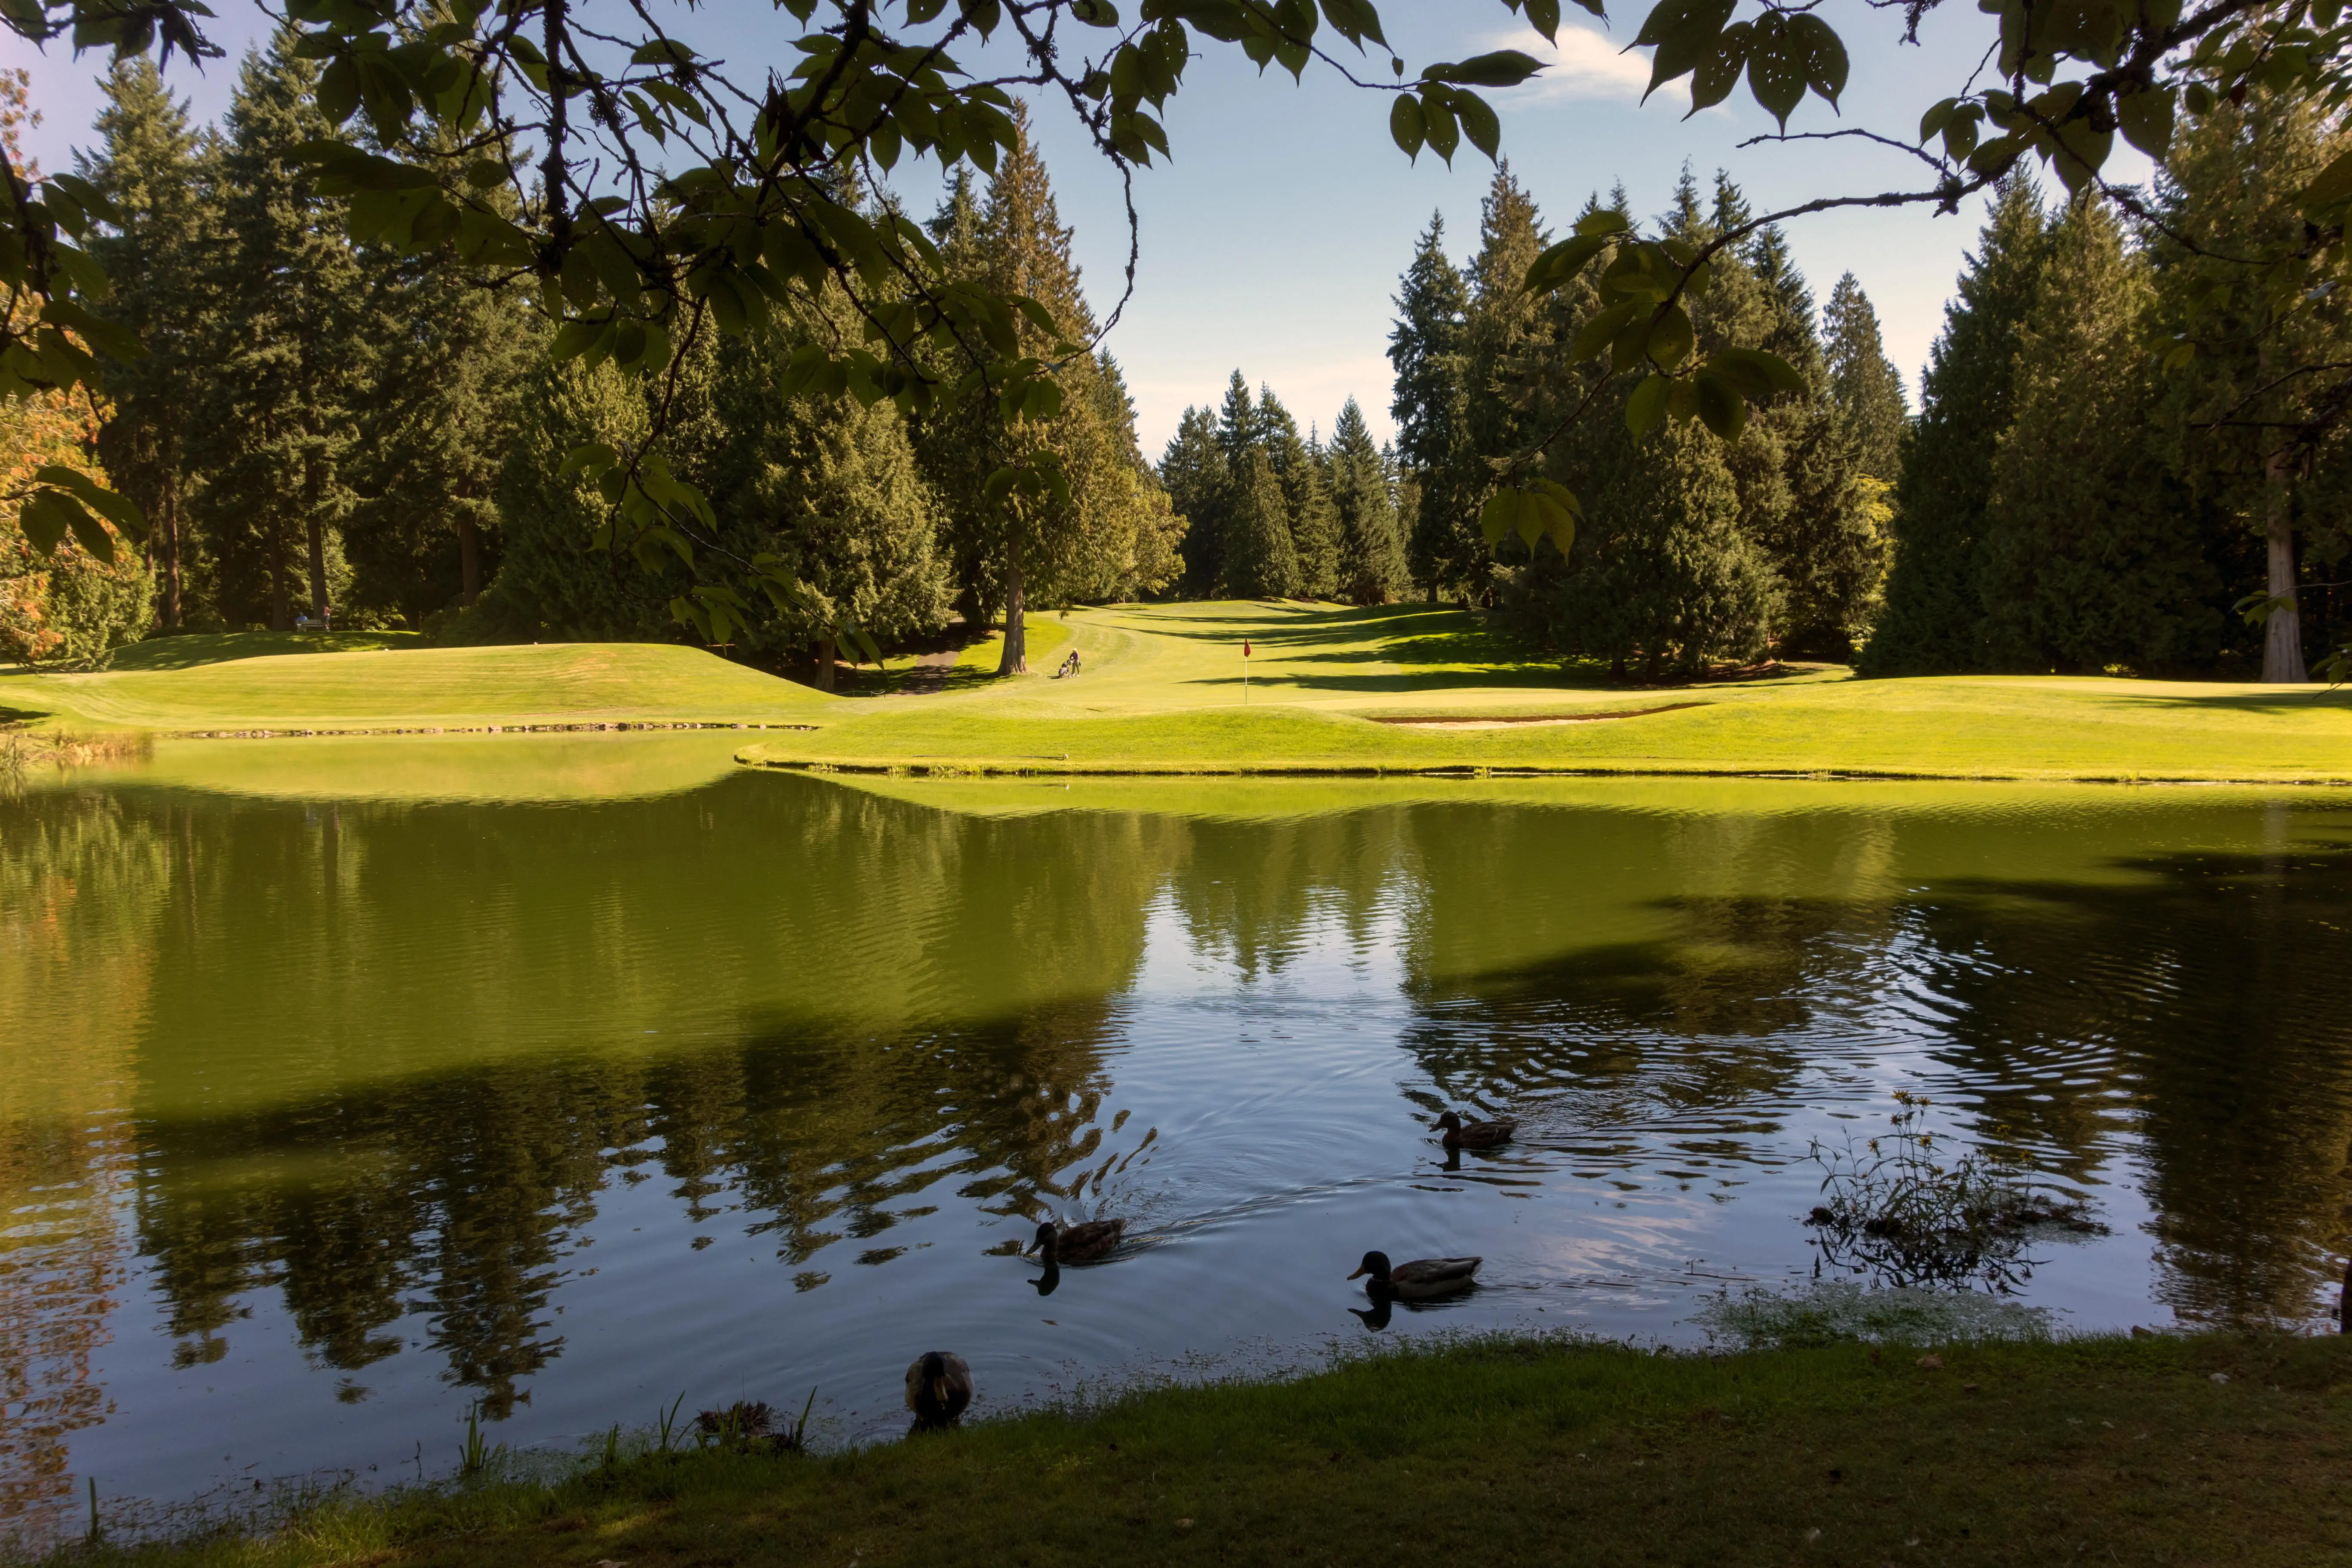 3. Sammamish, Washington: The Seattle-area town is a close third, with a $141,305 median household income. Which gives residents plenty of green to indulge in a round at the Sahalee golf course and Country Club.